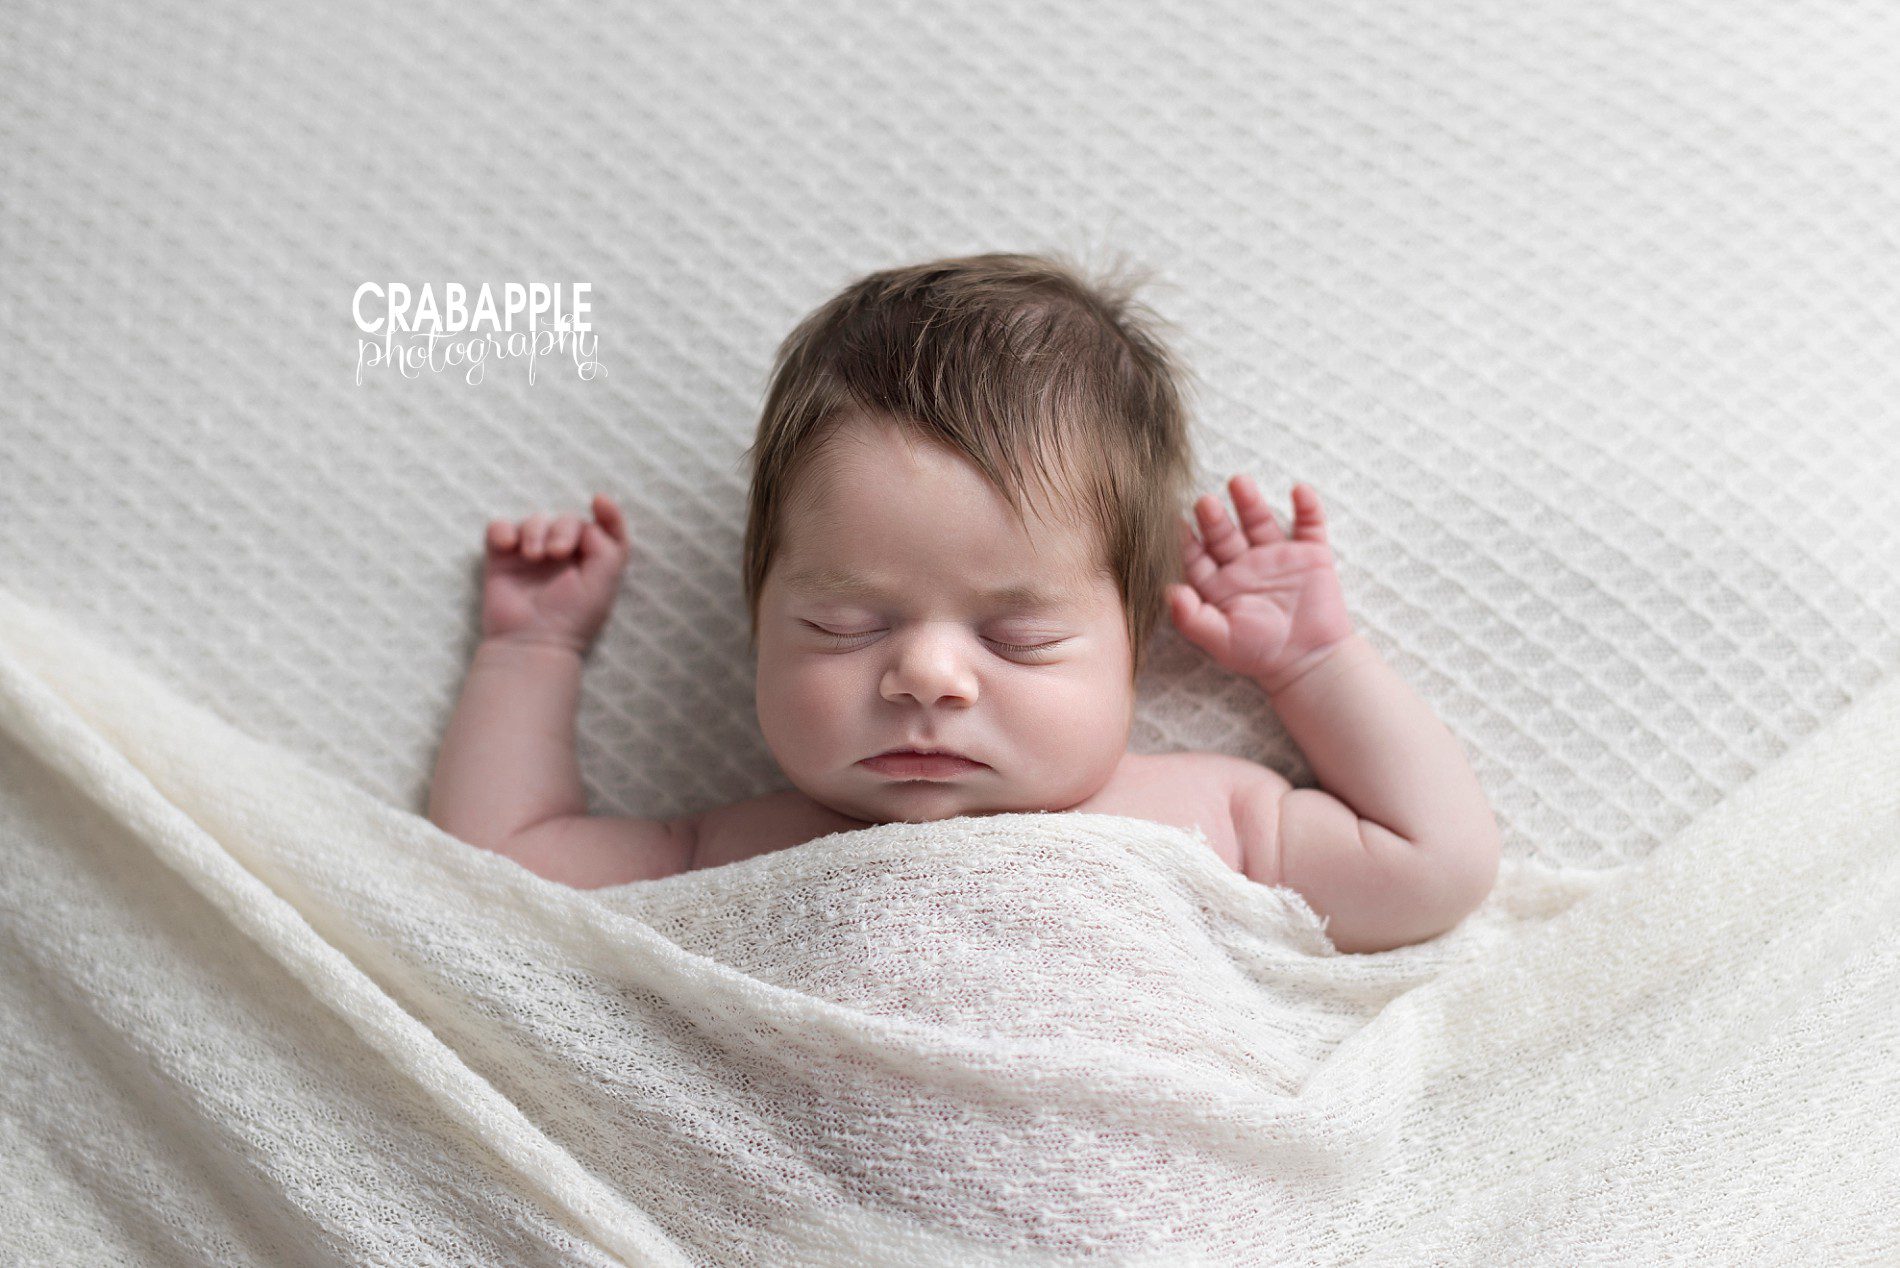 ideas for poses for newborn portraits inspiration